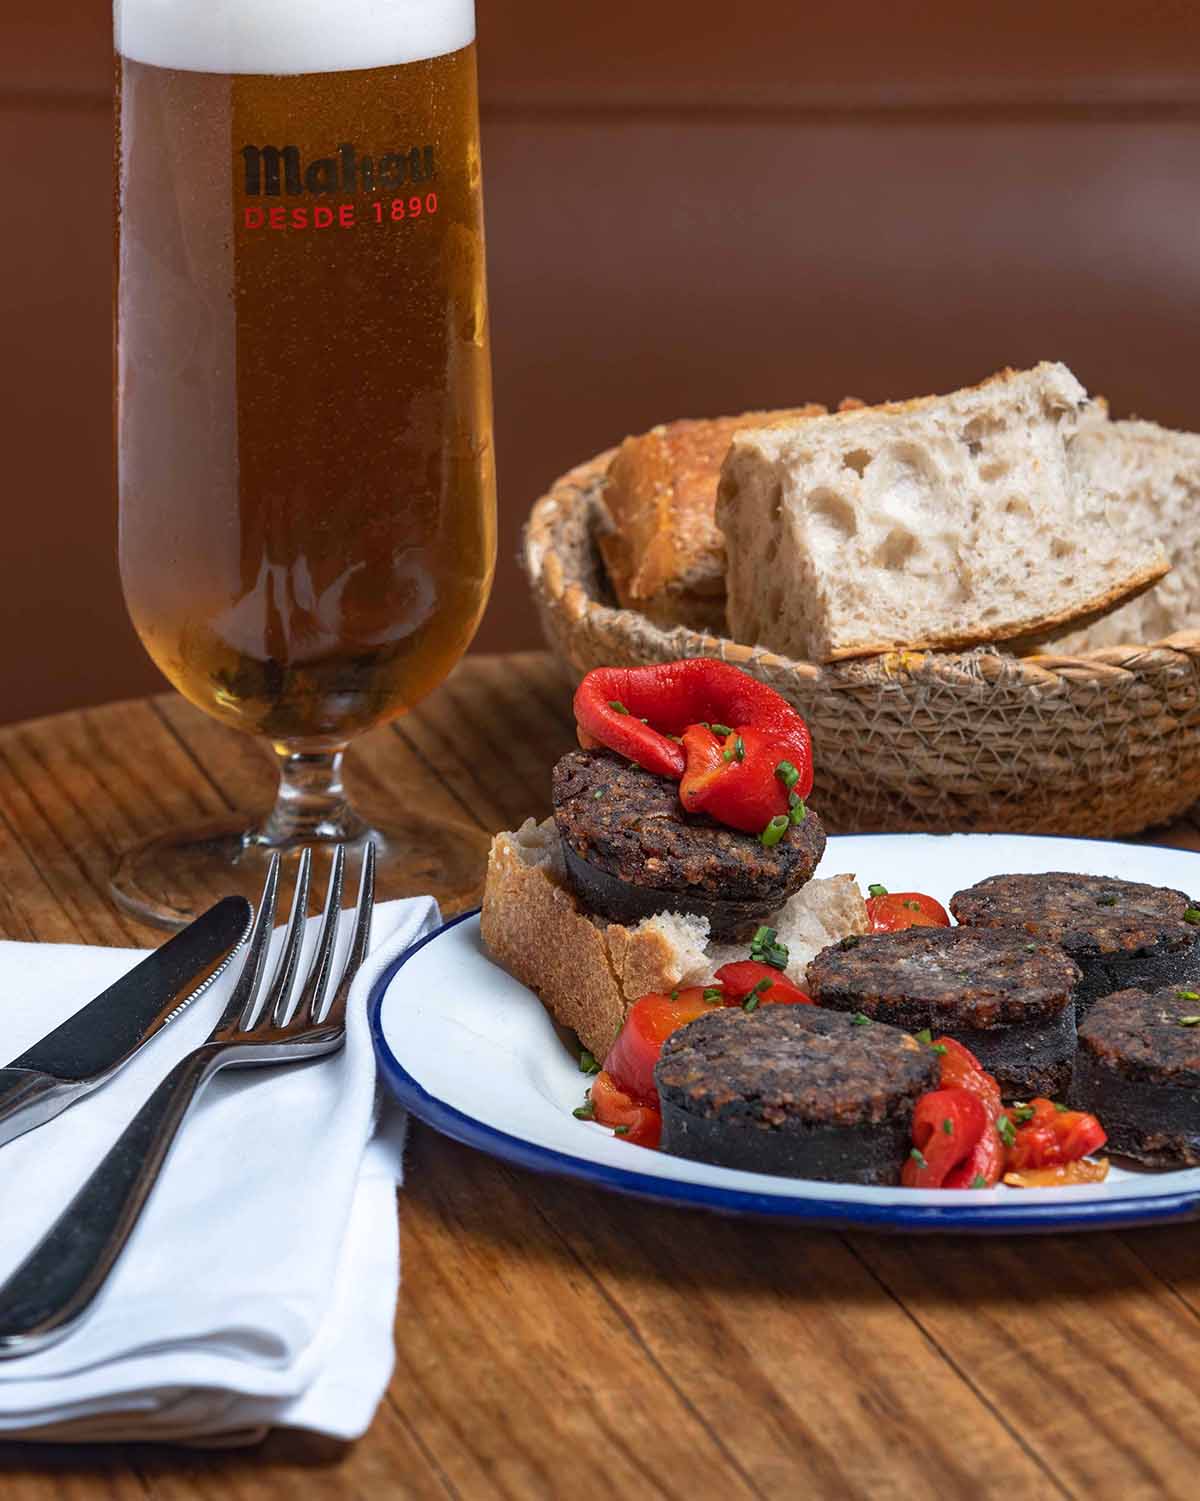 Black pudding from Burgos with caramelized peppers